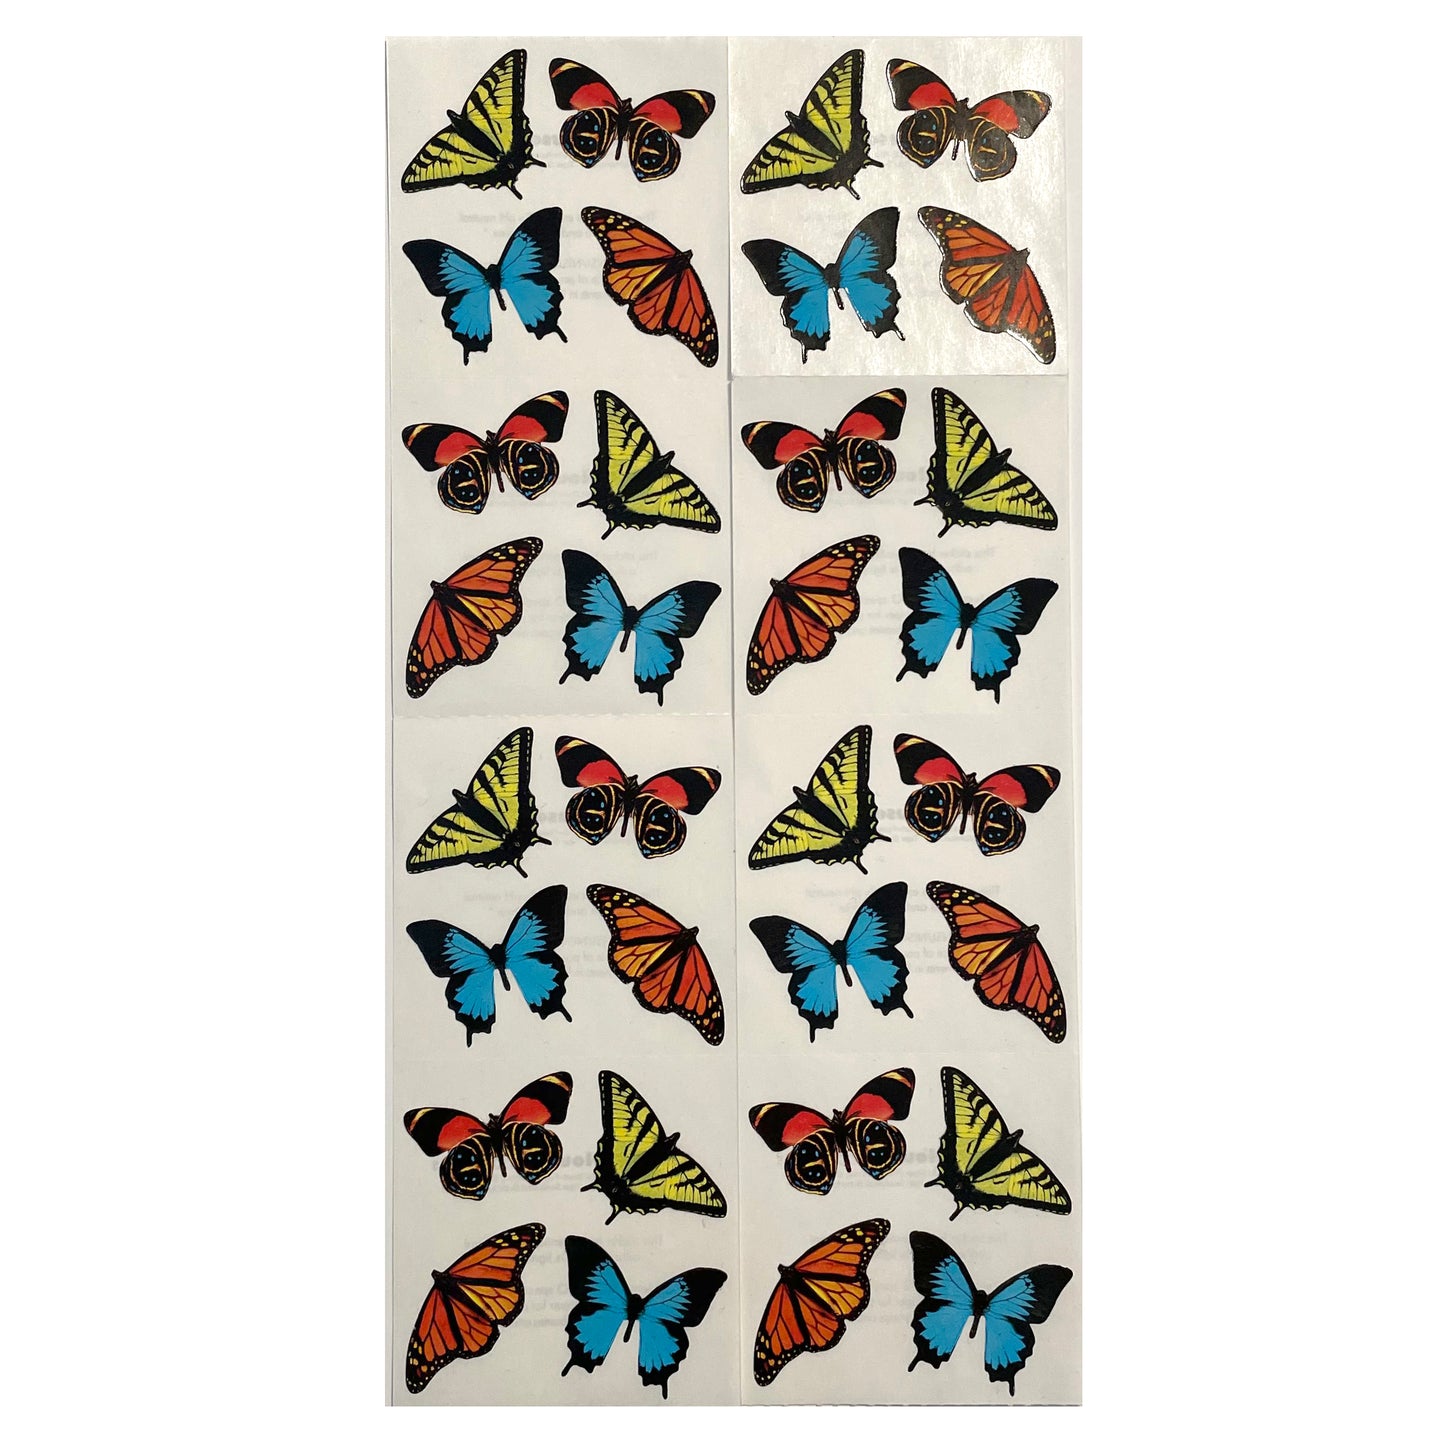 DEALS: 10 Sheets of Butterfly Stickers